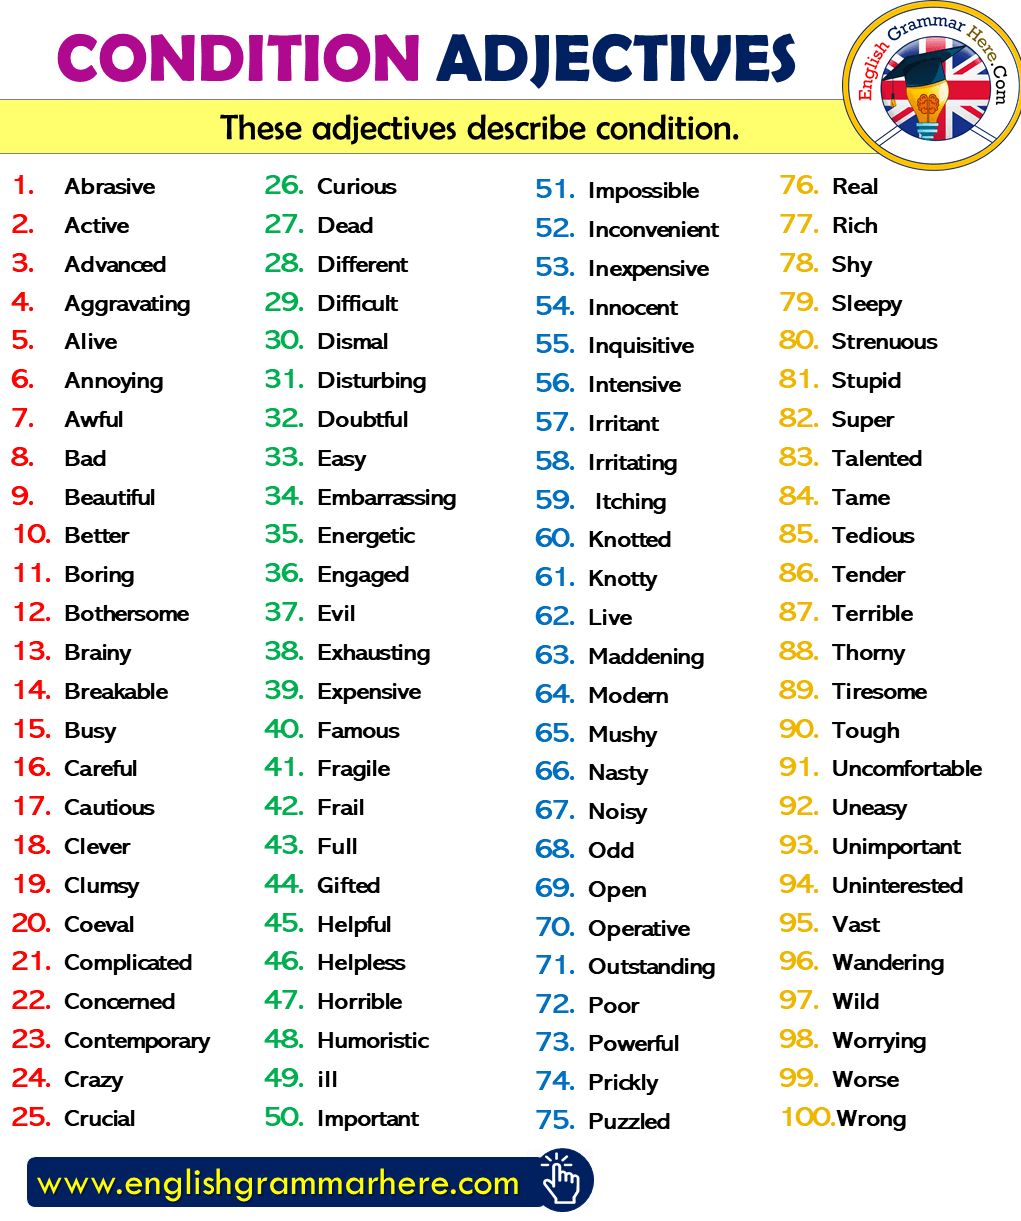 Condition Adjectives List in English